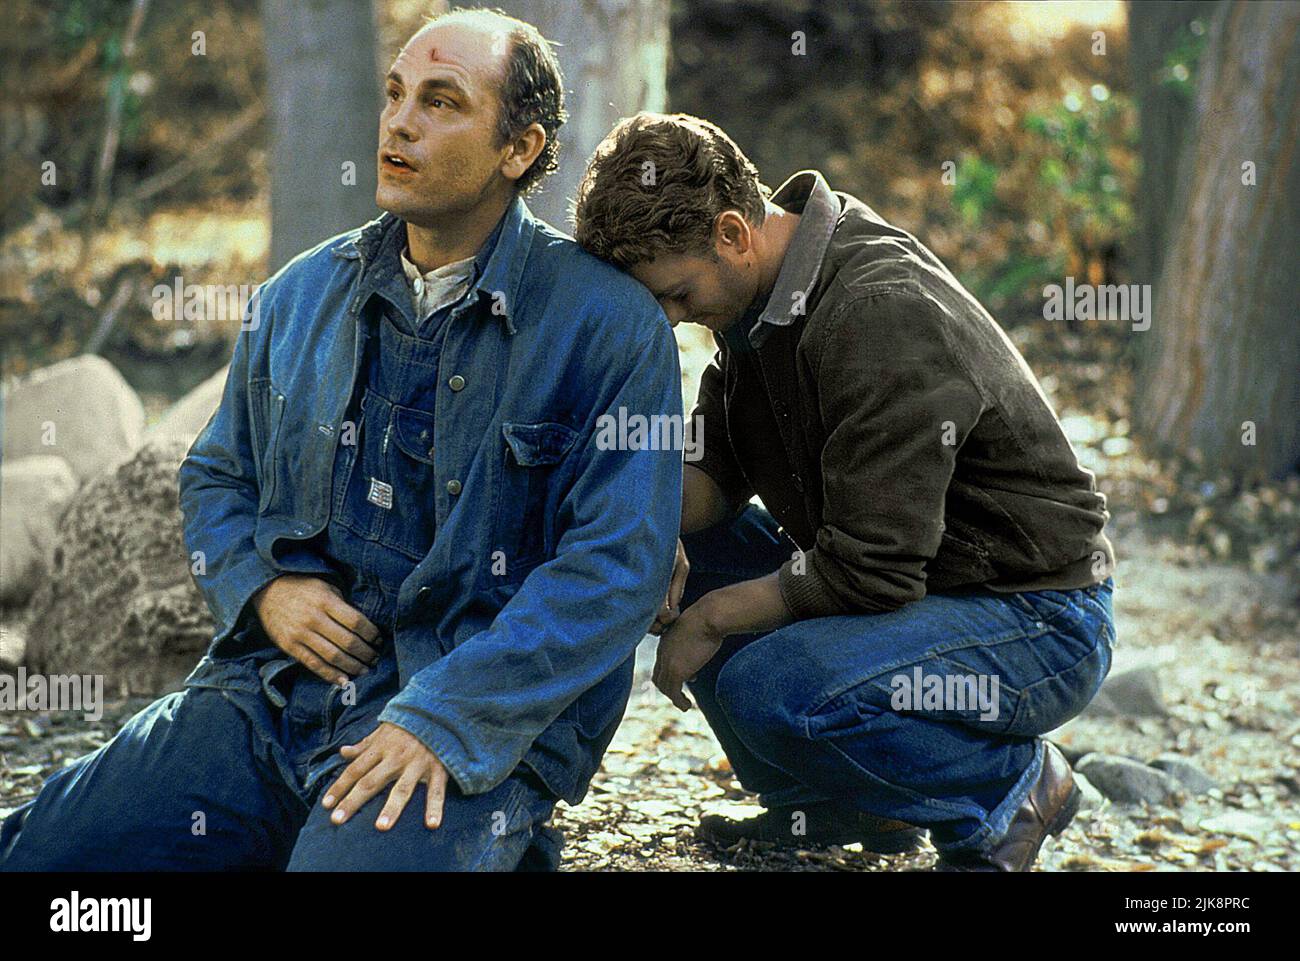 John Malkovich & Gary Sinise Film: Of Mice And Men (1992) Characters:  Lennie Small & Director: Gary Sinise 16 September 1992 **WARNING** This  Photograph is for editorial use only and is the